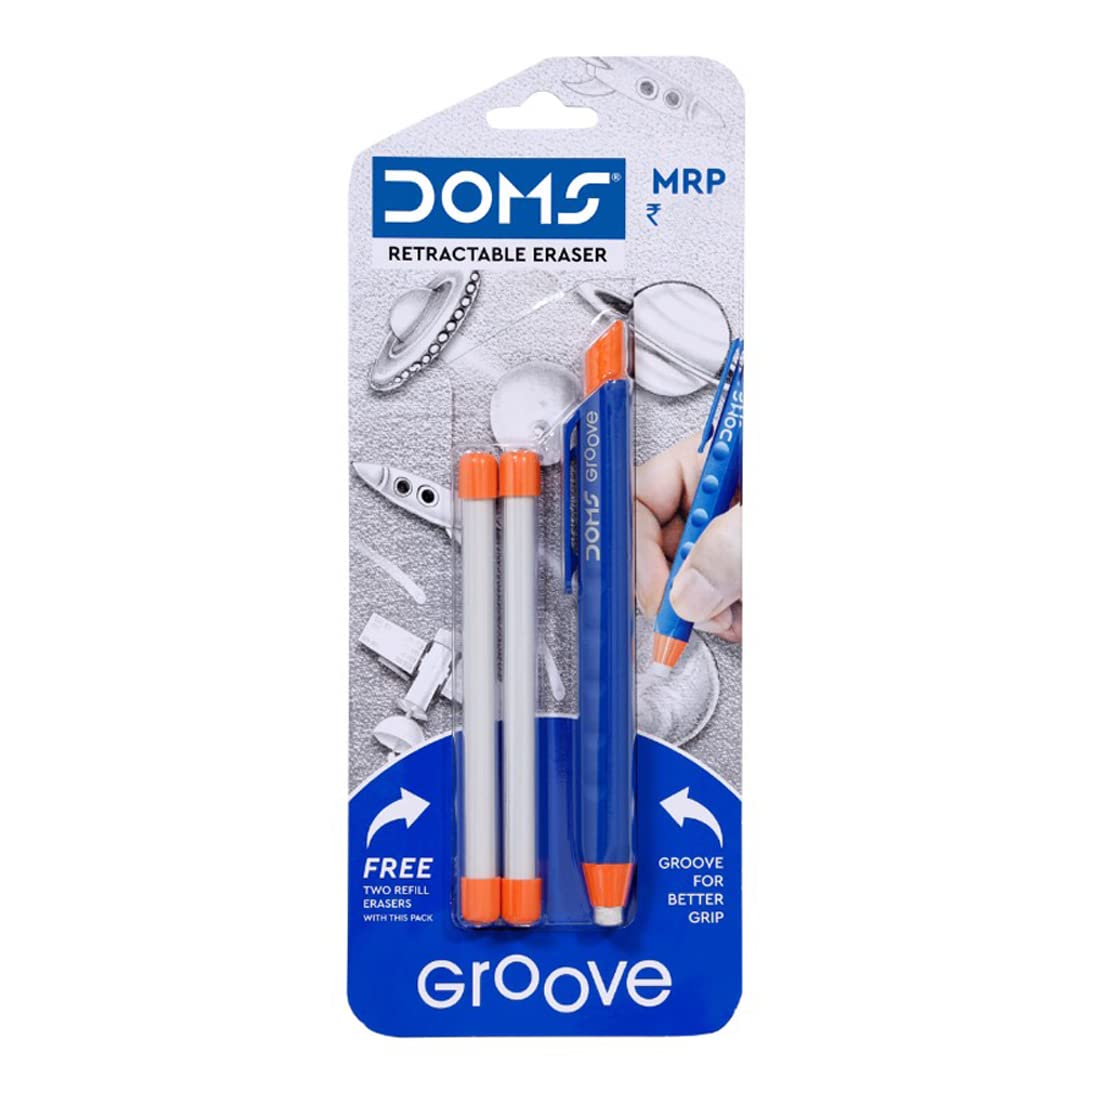 Doms Groove Retractable Eraser | Groove for Better Grip with Excellent Erasing Performance | Free 2 Refill Eraser with This Pack | Pack of 5